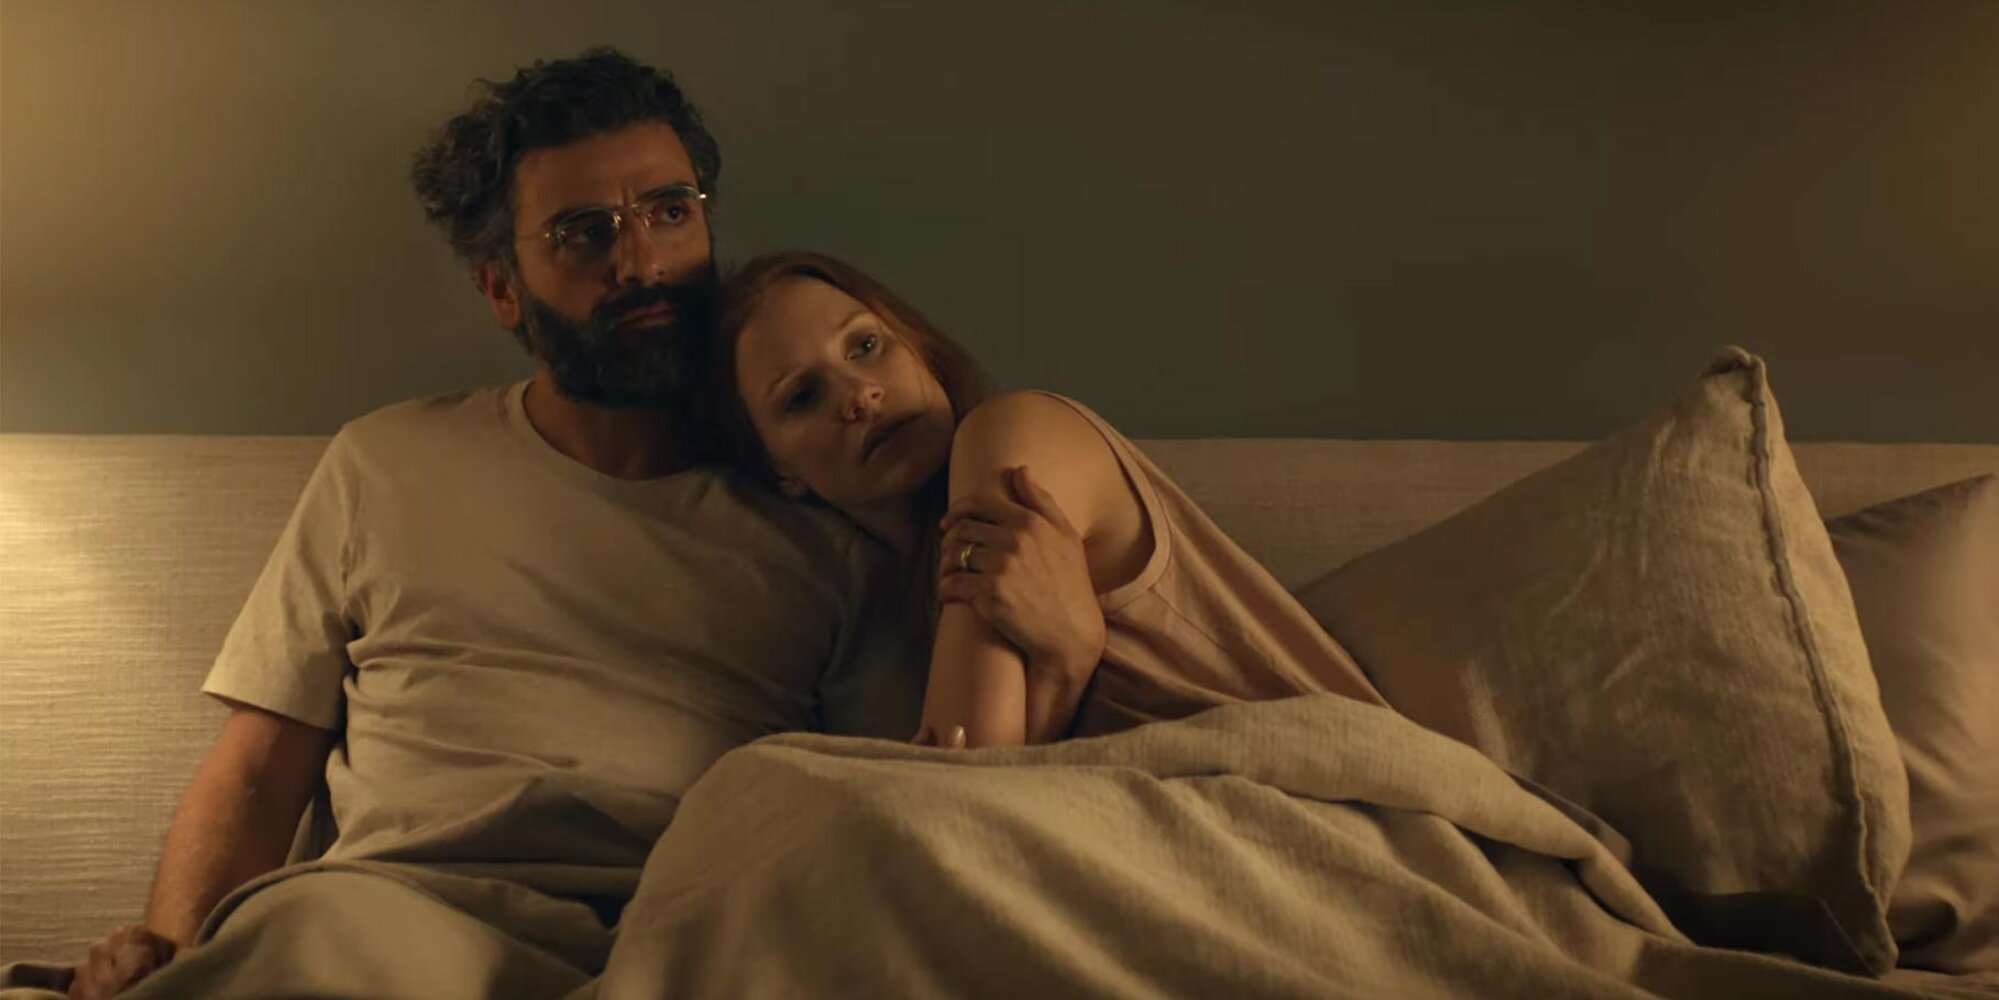 Oscar Isaac and Jessica Chastain are back together in HBO’s Scenes From a Marriage